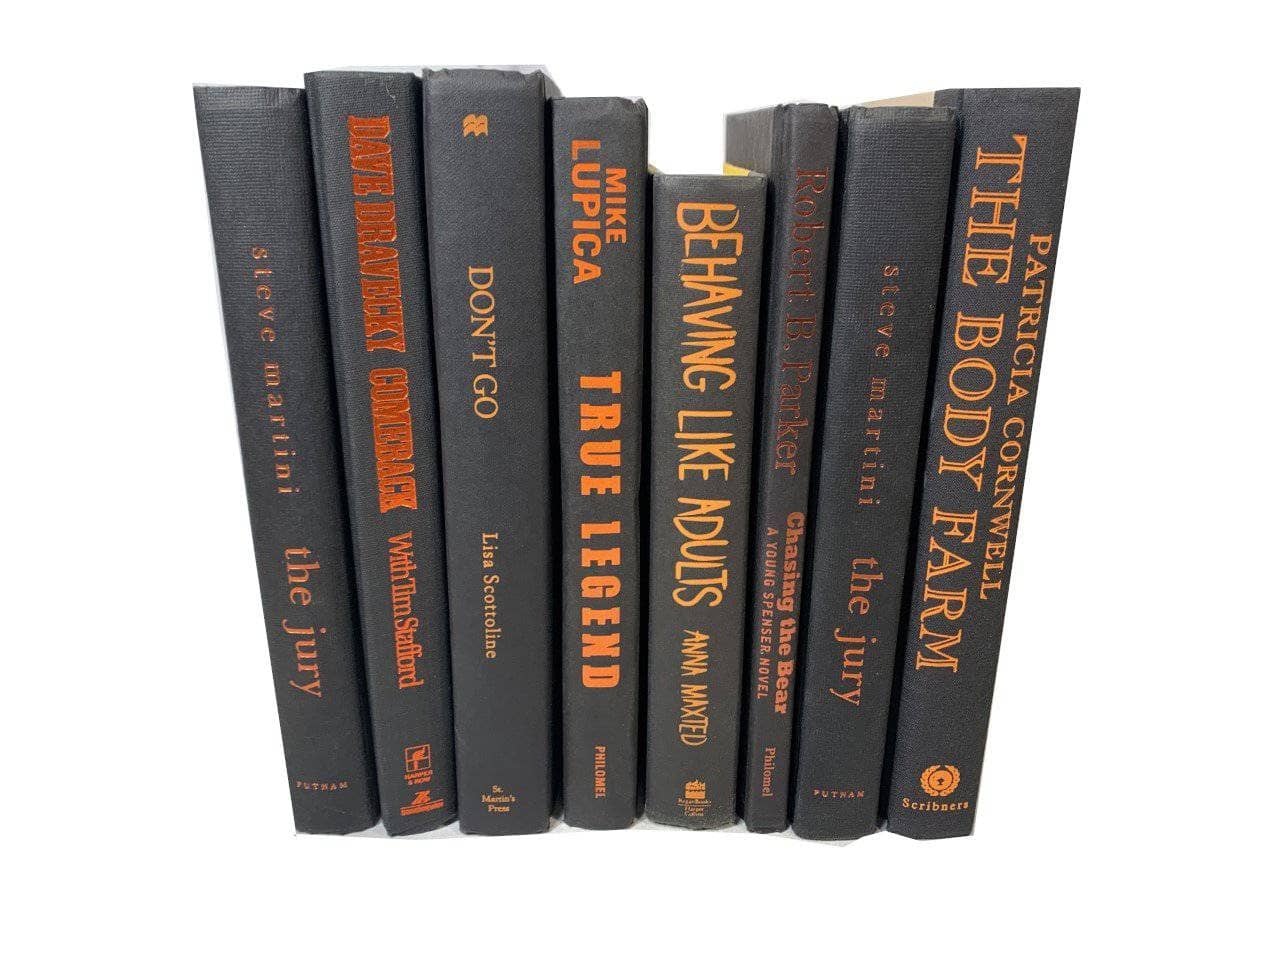 Modern Black Books with Color Accents